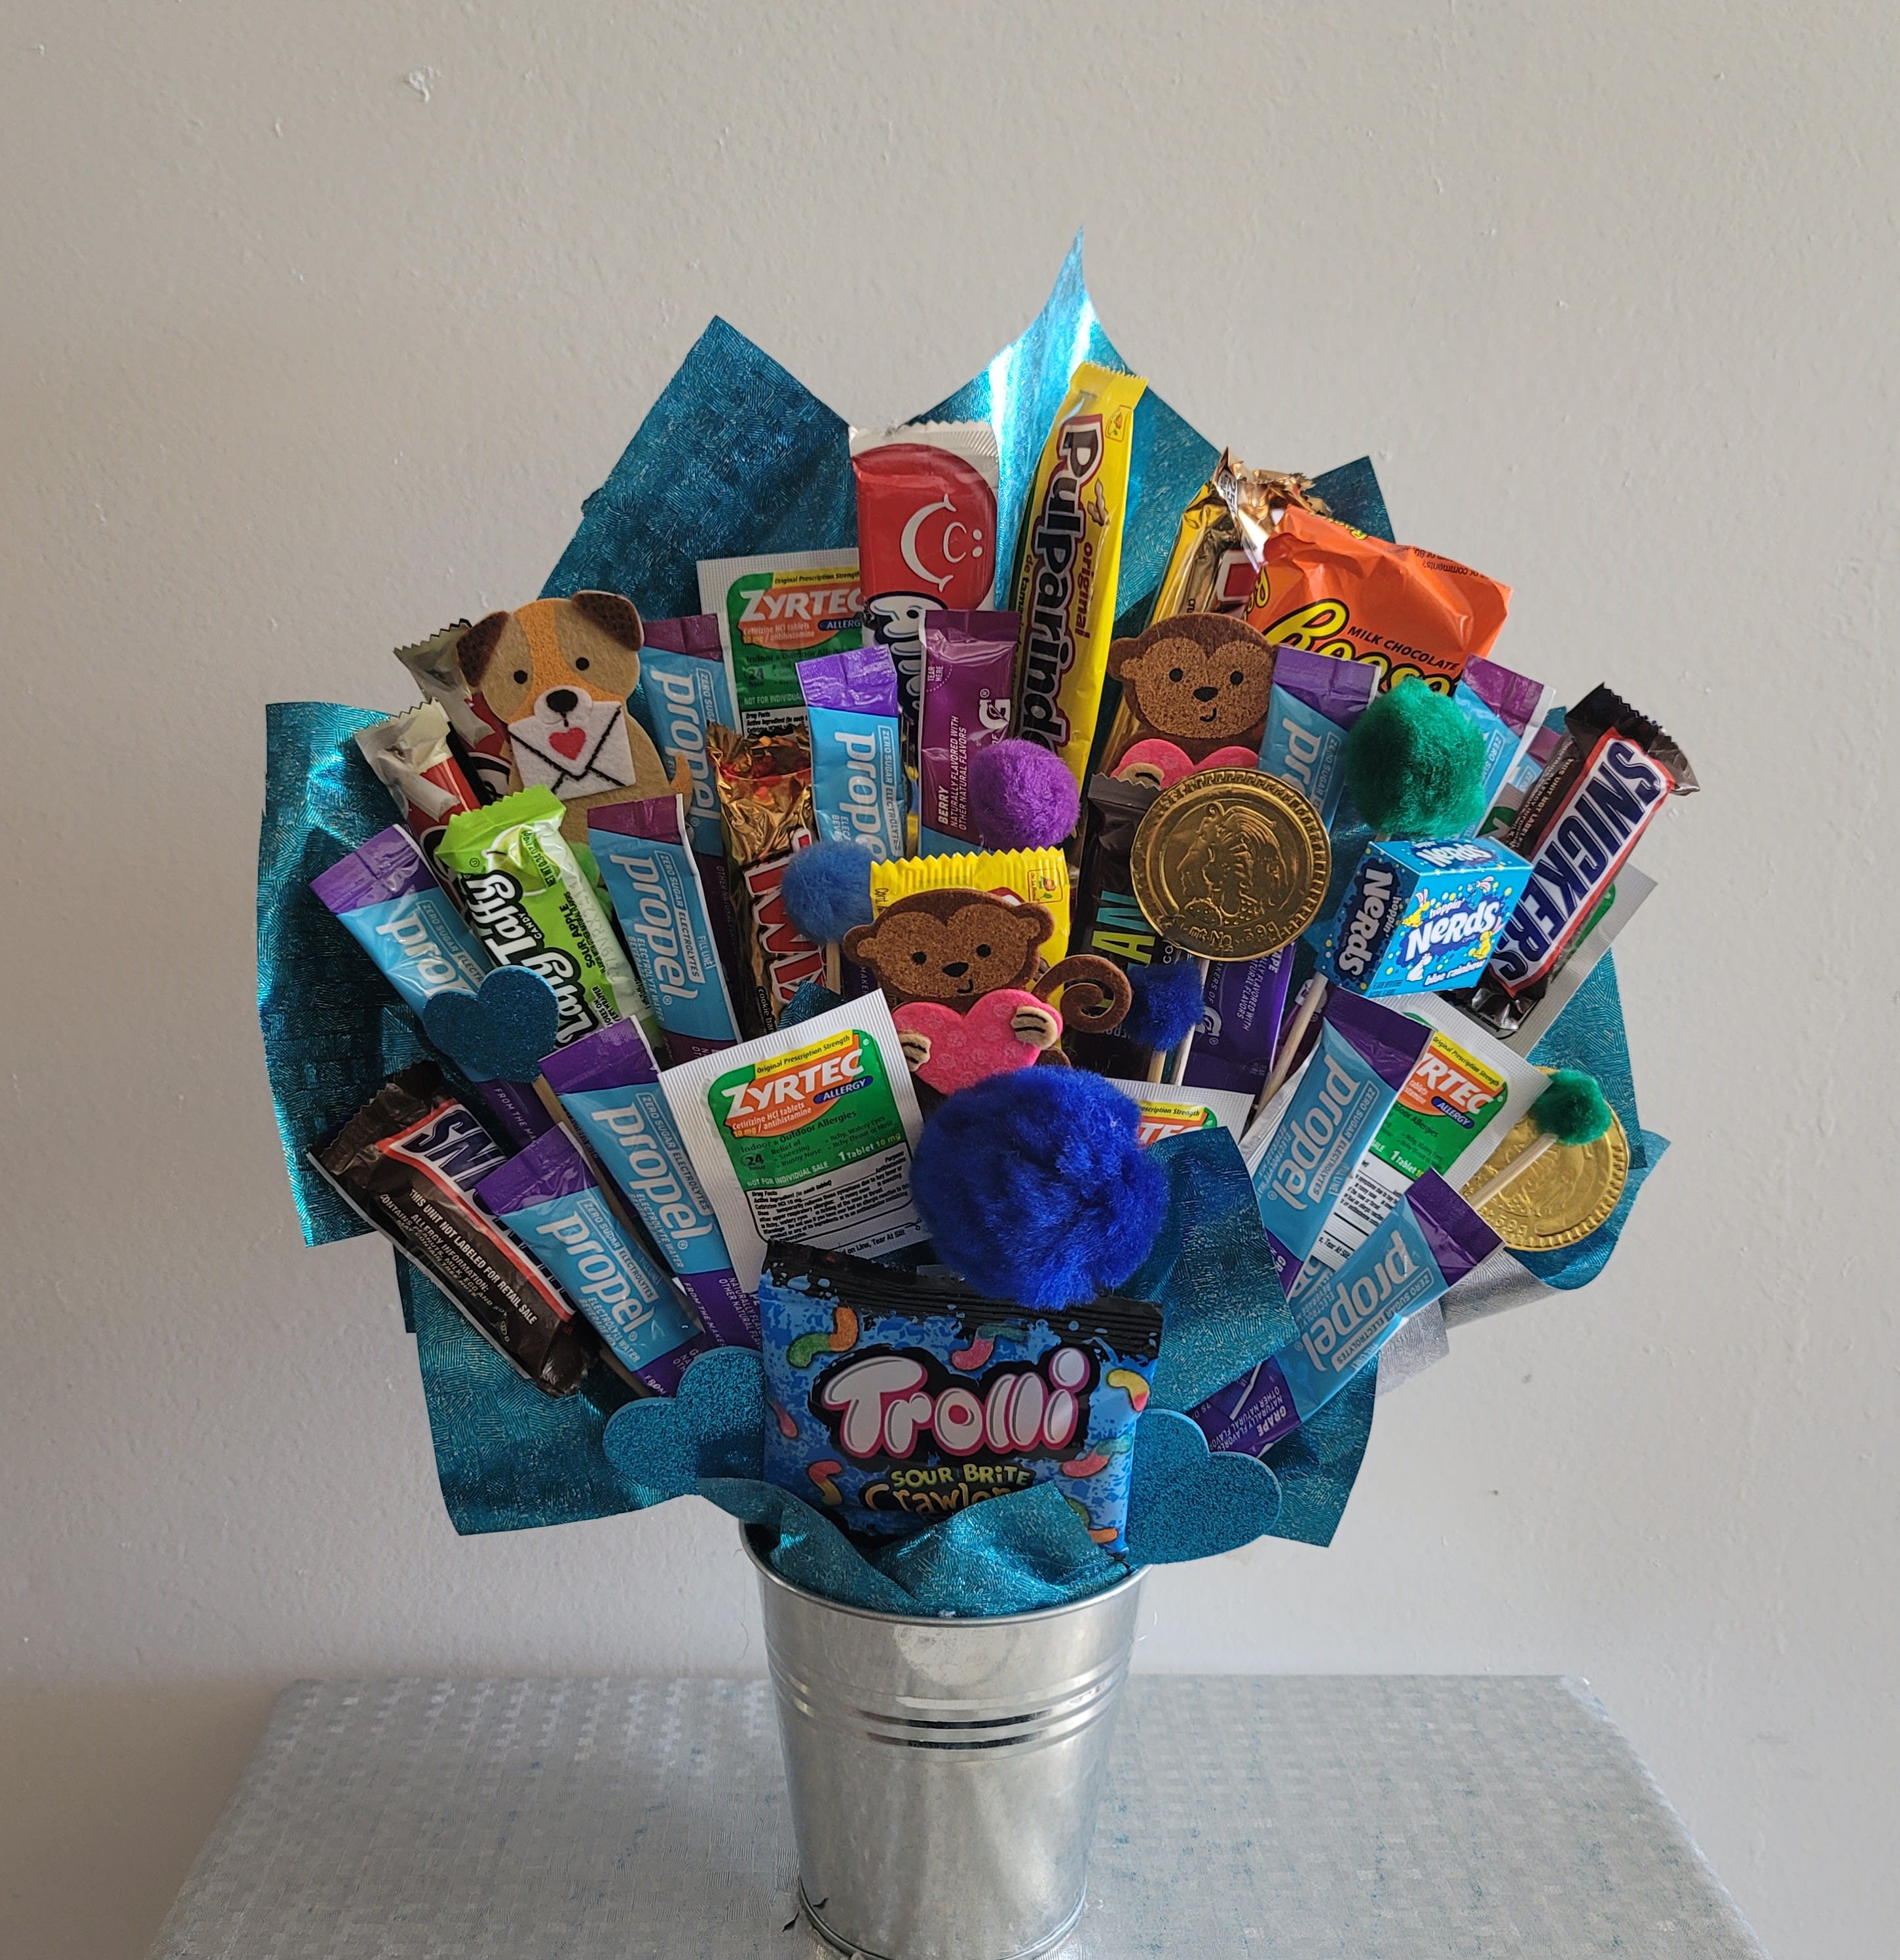 BLUE CANDY BOUQUE BY XOCHITL FLOWERS EP - NICE CANDY BOUQUET DECORATED IN BLUE FOR YOUR SPECIAL GIFT